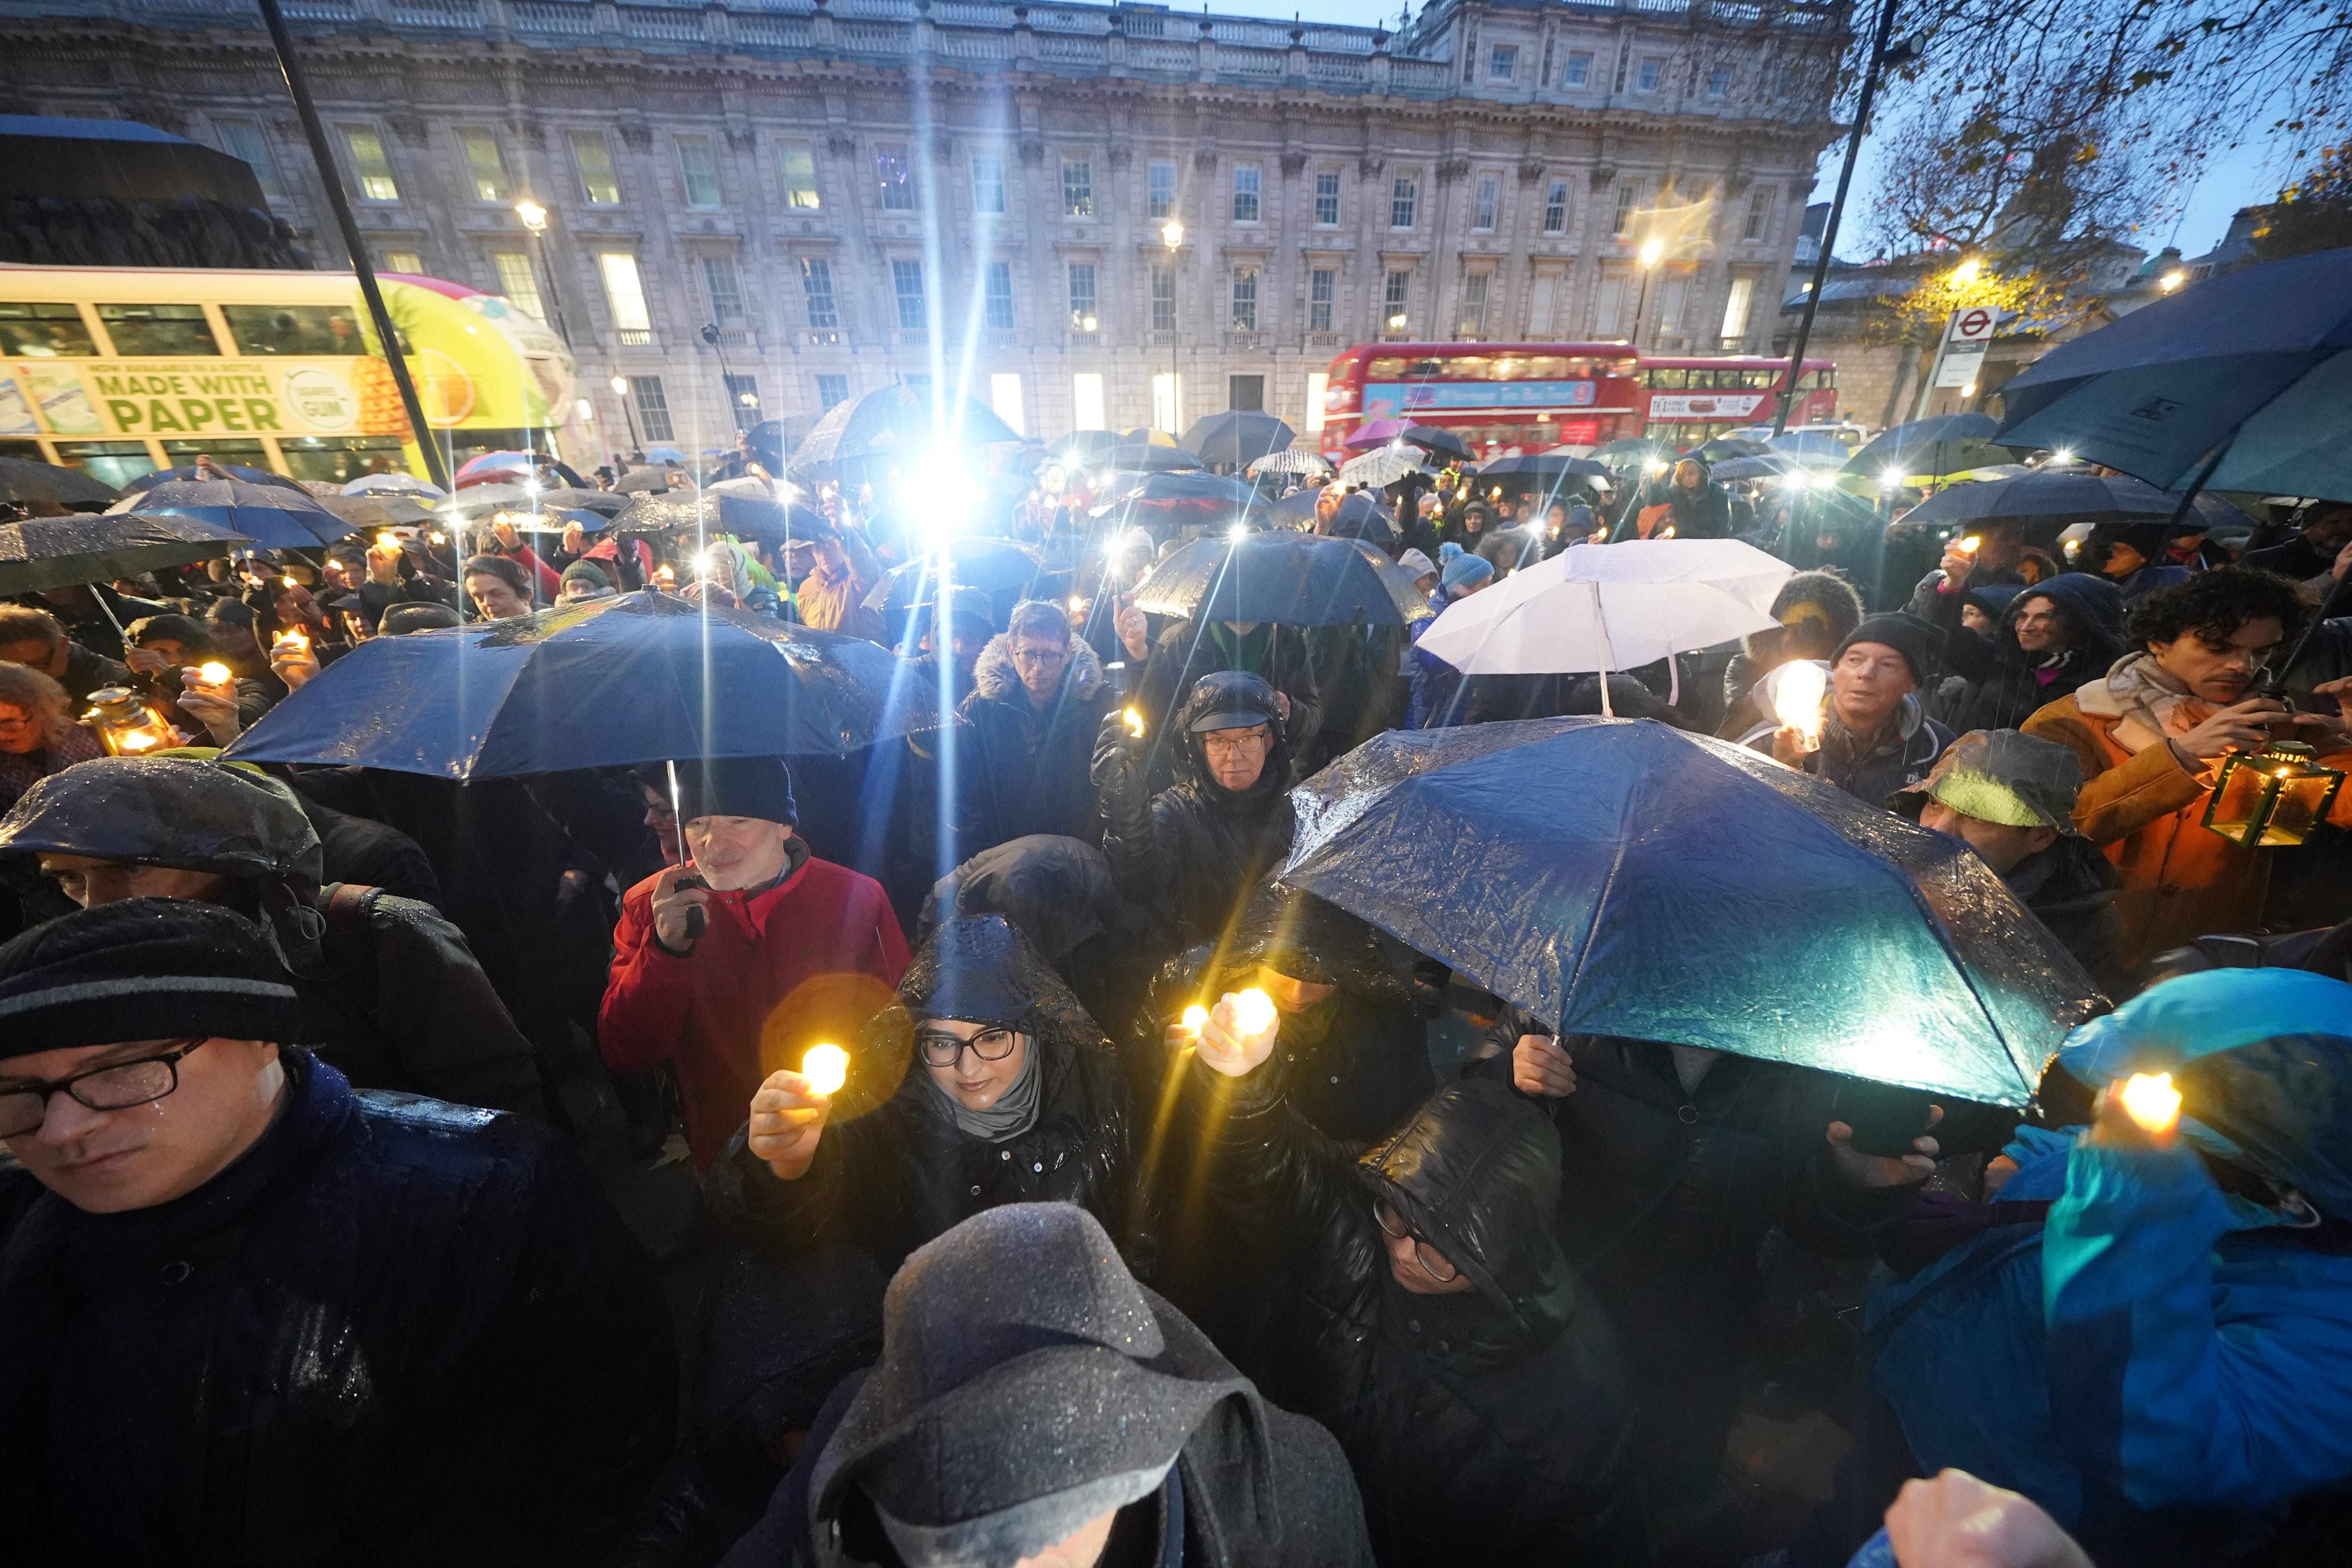 People hold candles during an anti-hate vigil on Whitehall in central London